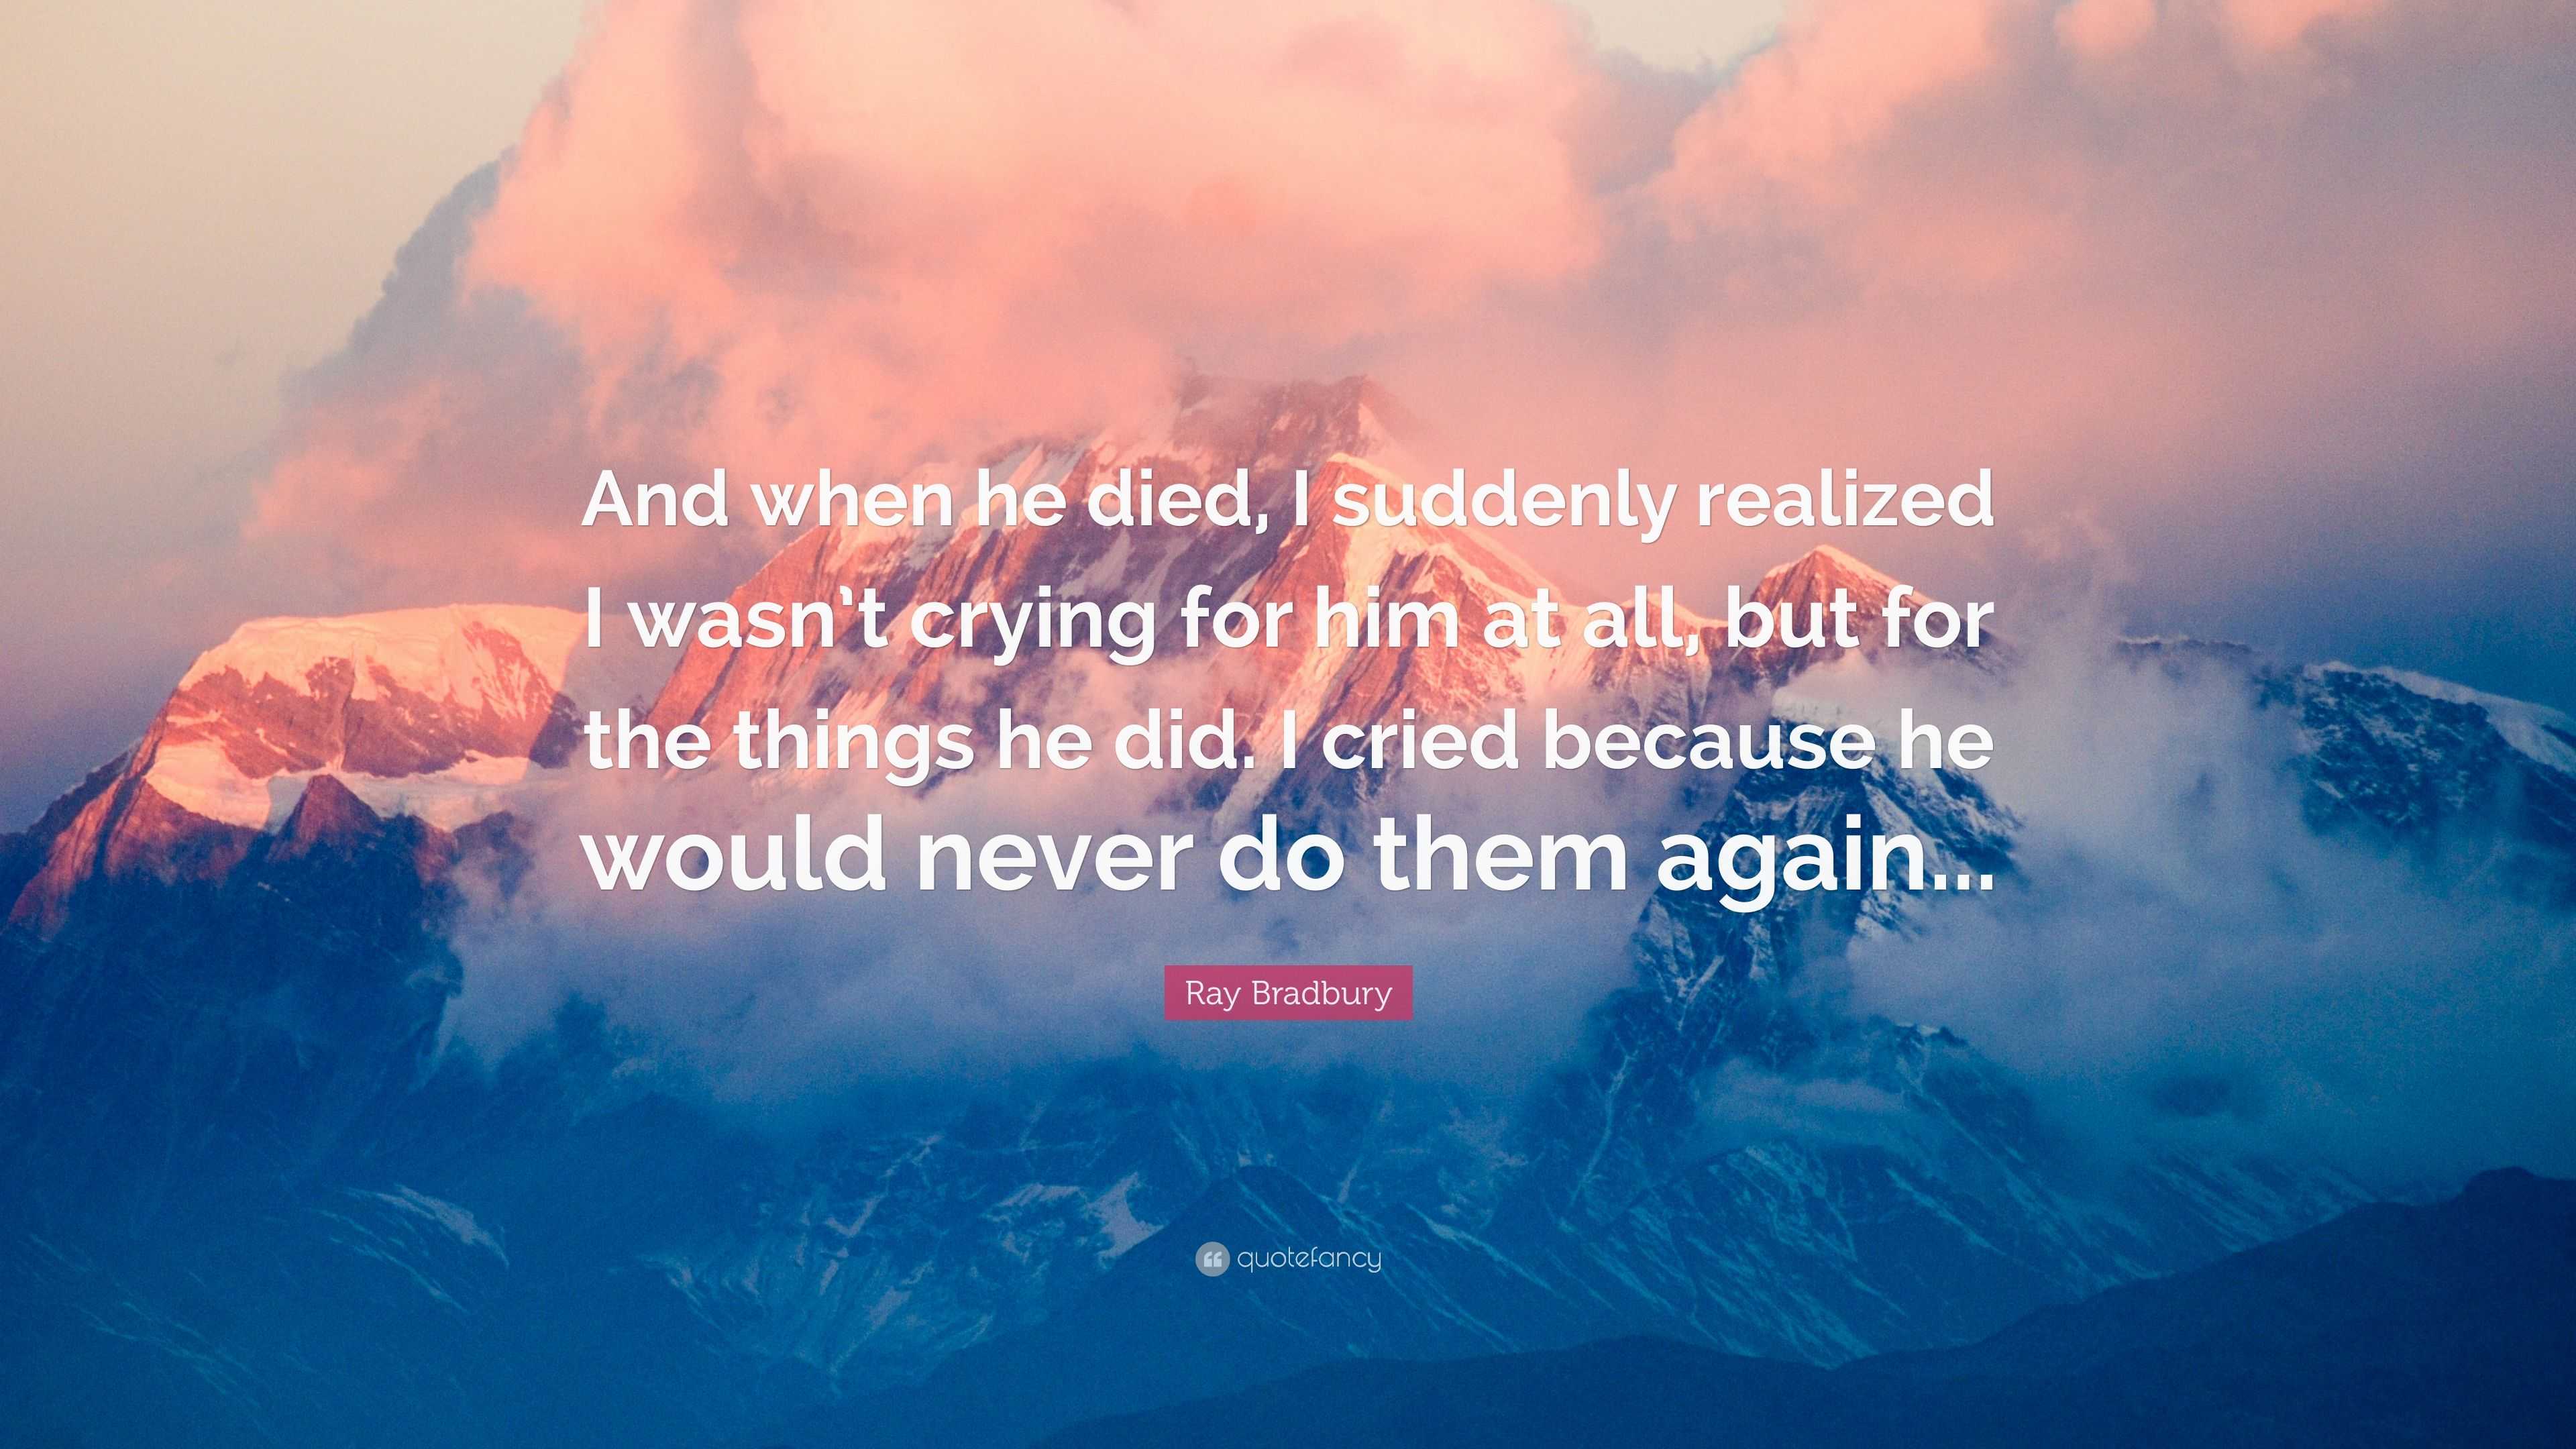 Ray Bradbury Quote: “And when he died, I suddenly realized I wasn’t ...